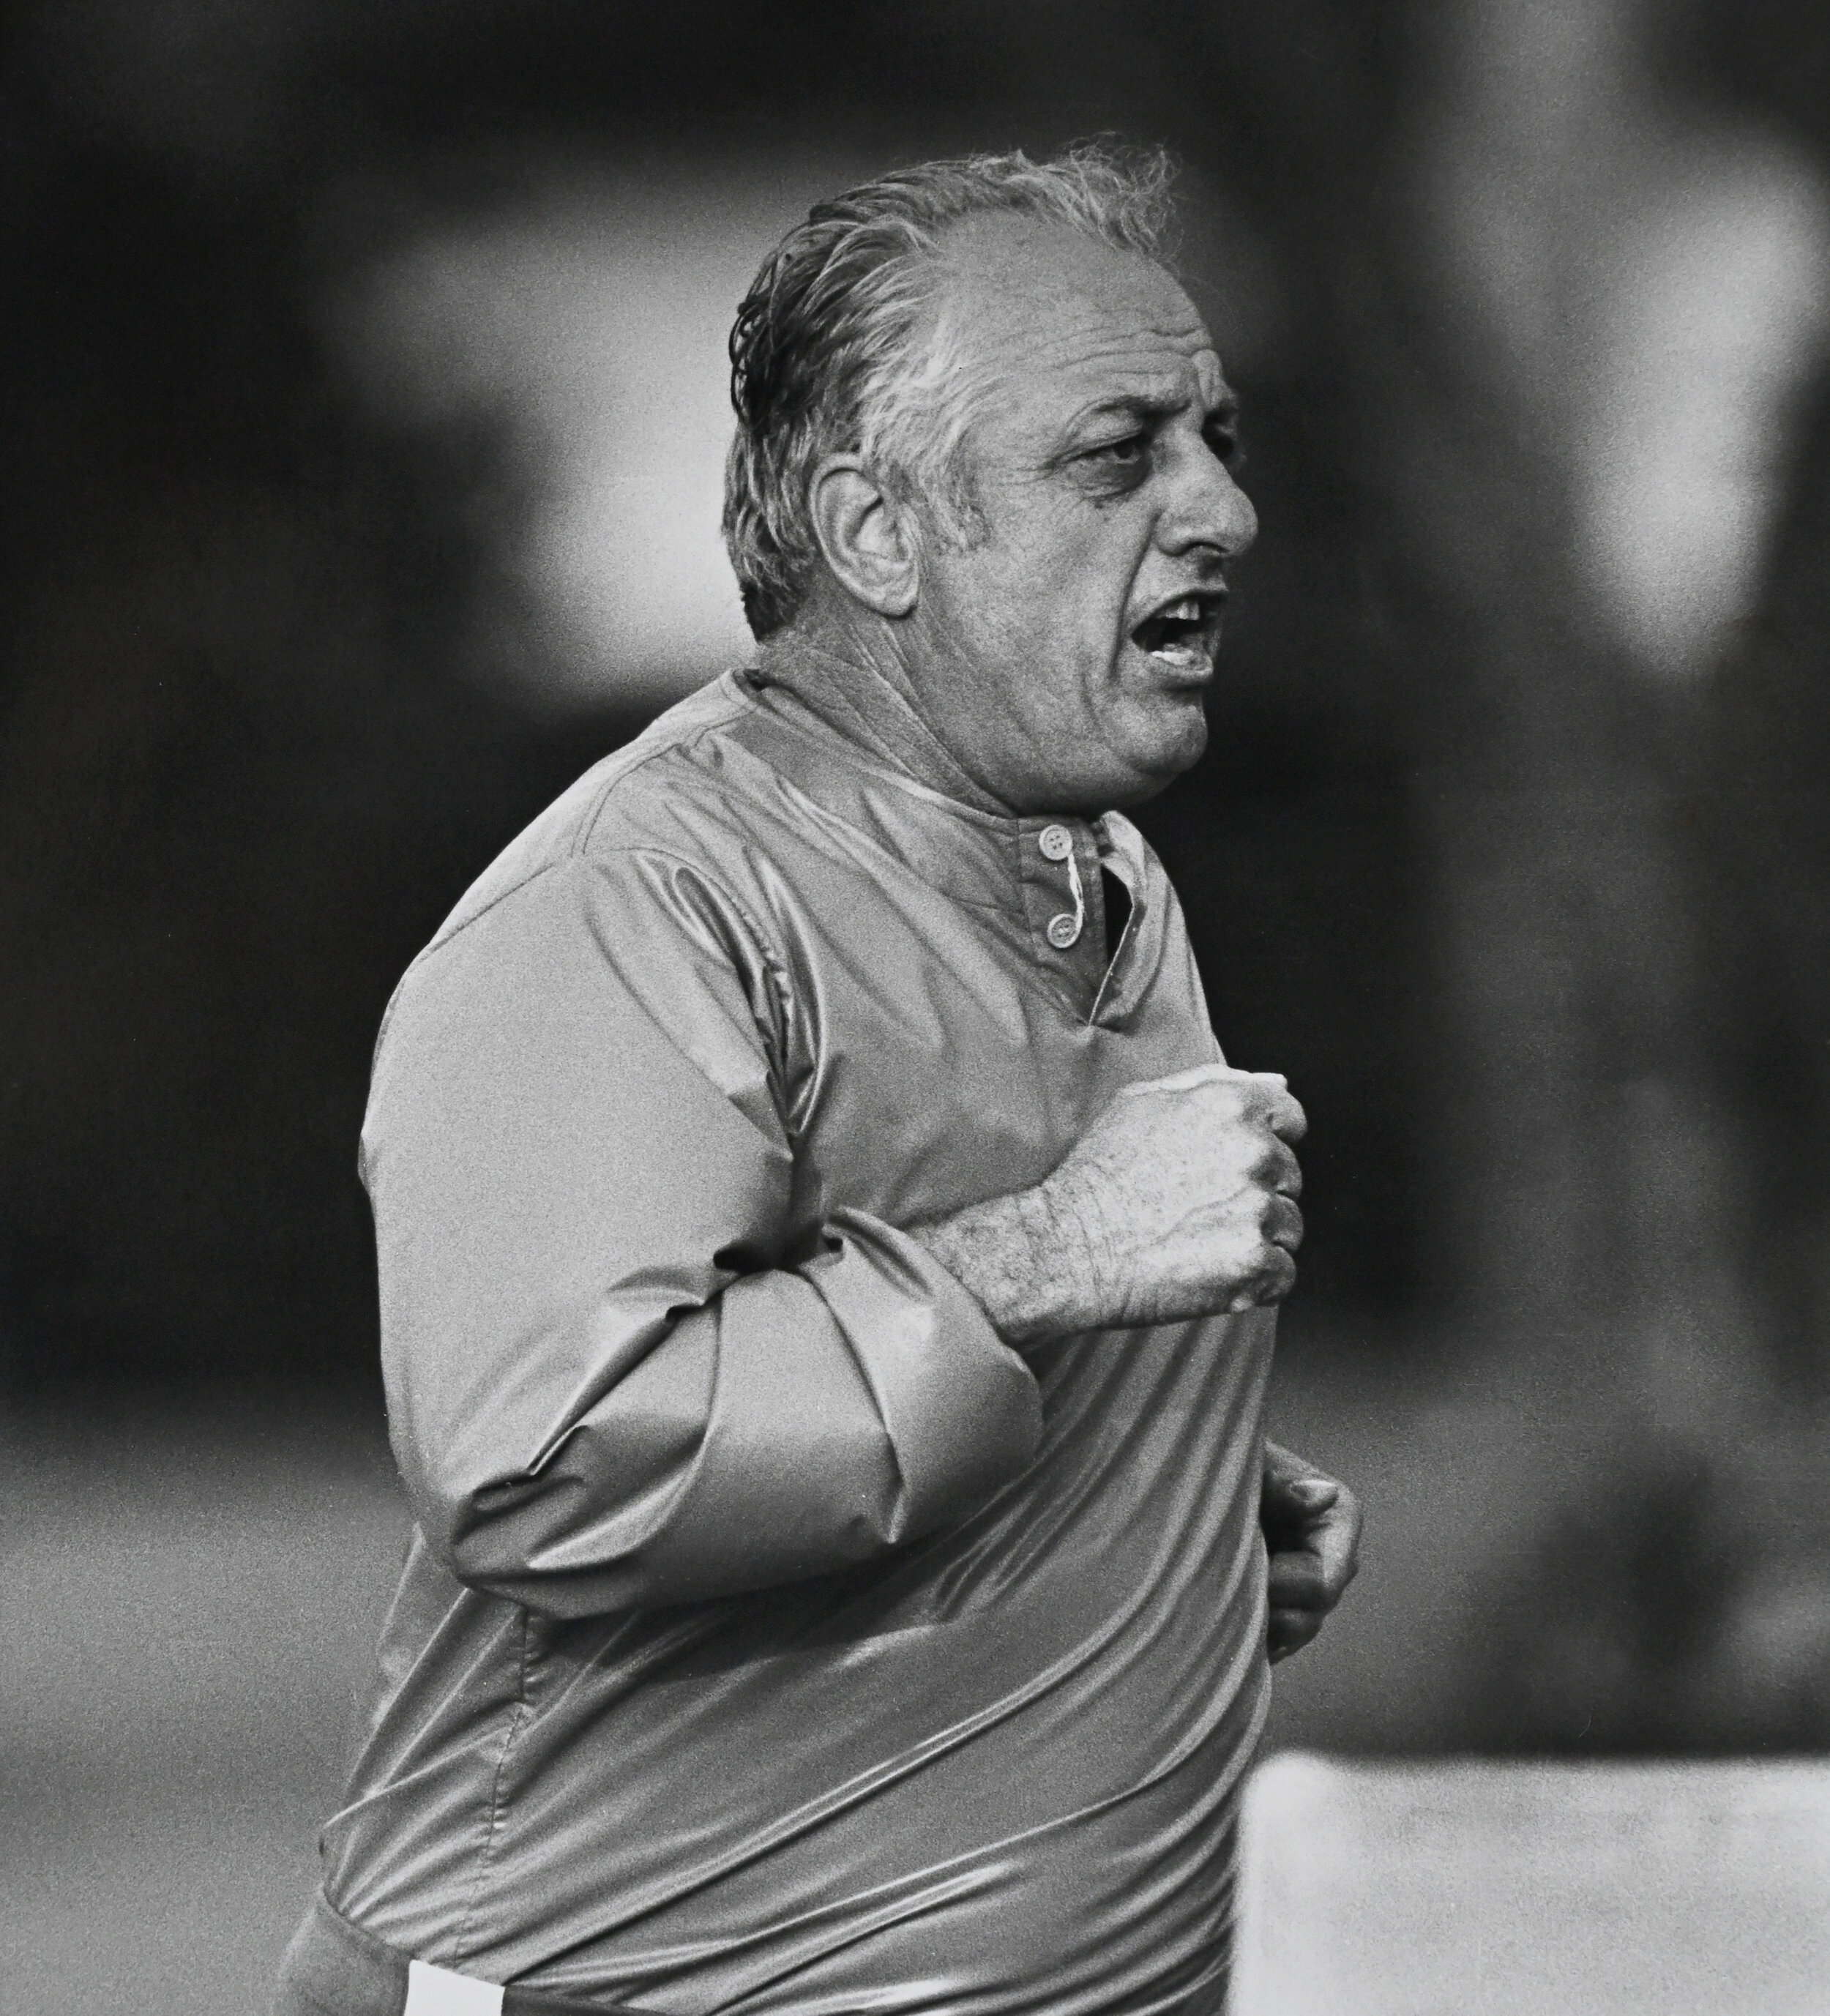  VERO BEACH, FL - FEBRUARY 15, 1981:  Manager Tommy Lasorda #2 of the Los Angeles Dodgers jogs during spring training at Dodgertown in Vero Beach, Florida. (Photo by Jayne Kamin-Oncea/Getty Images) 